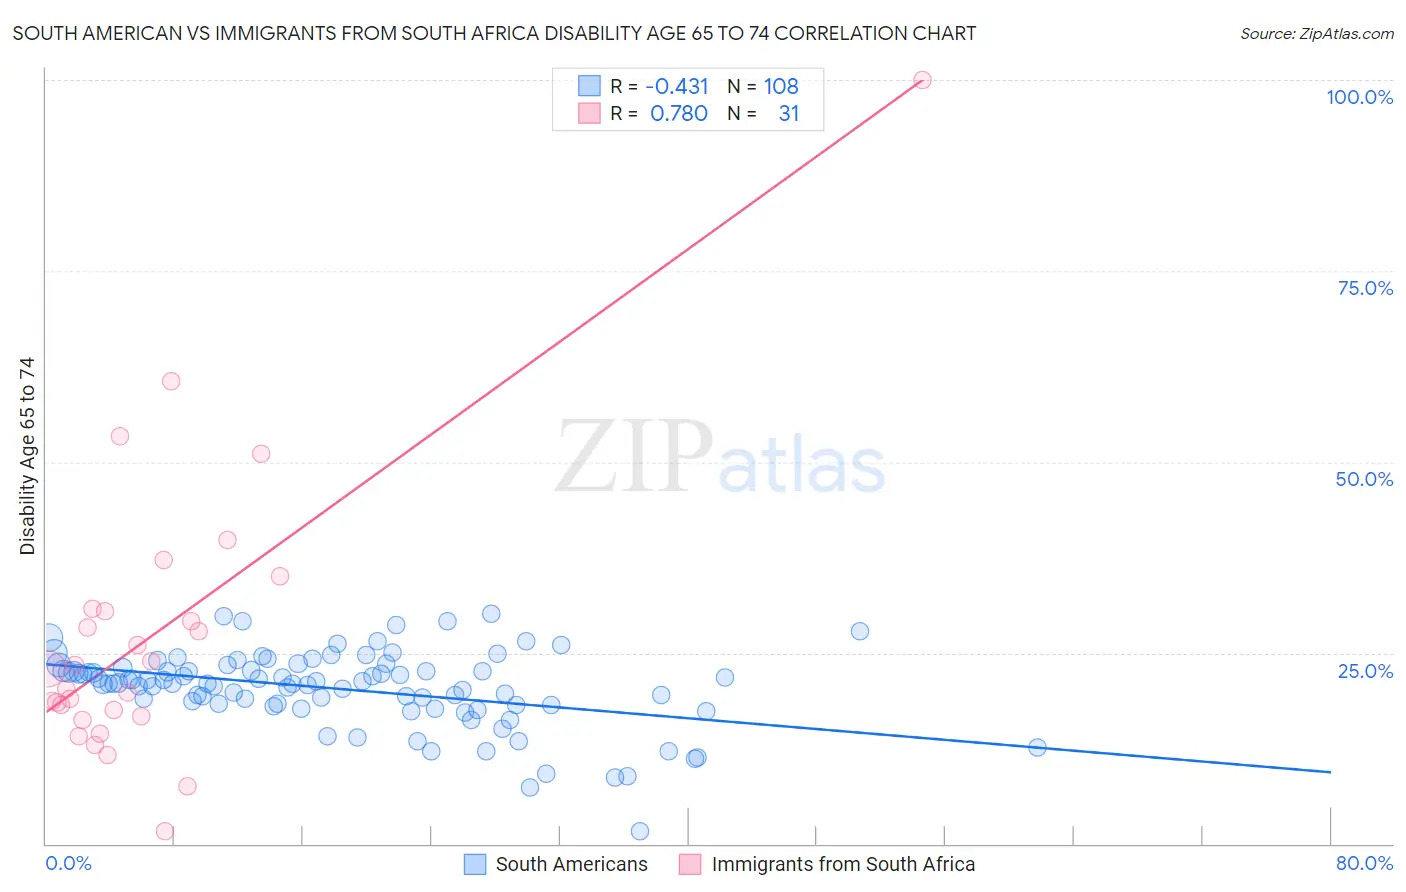 South American vs Immigrants from South Africa Disability Age 65 to 74